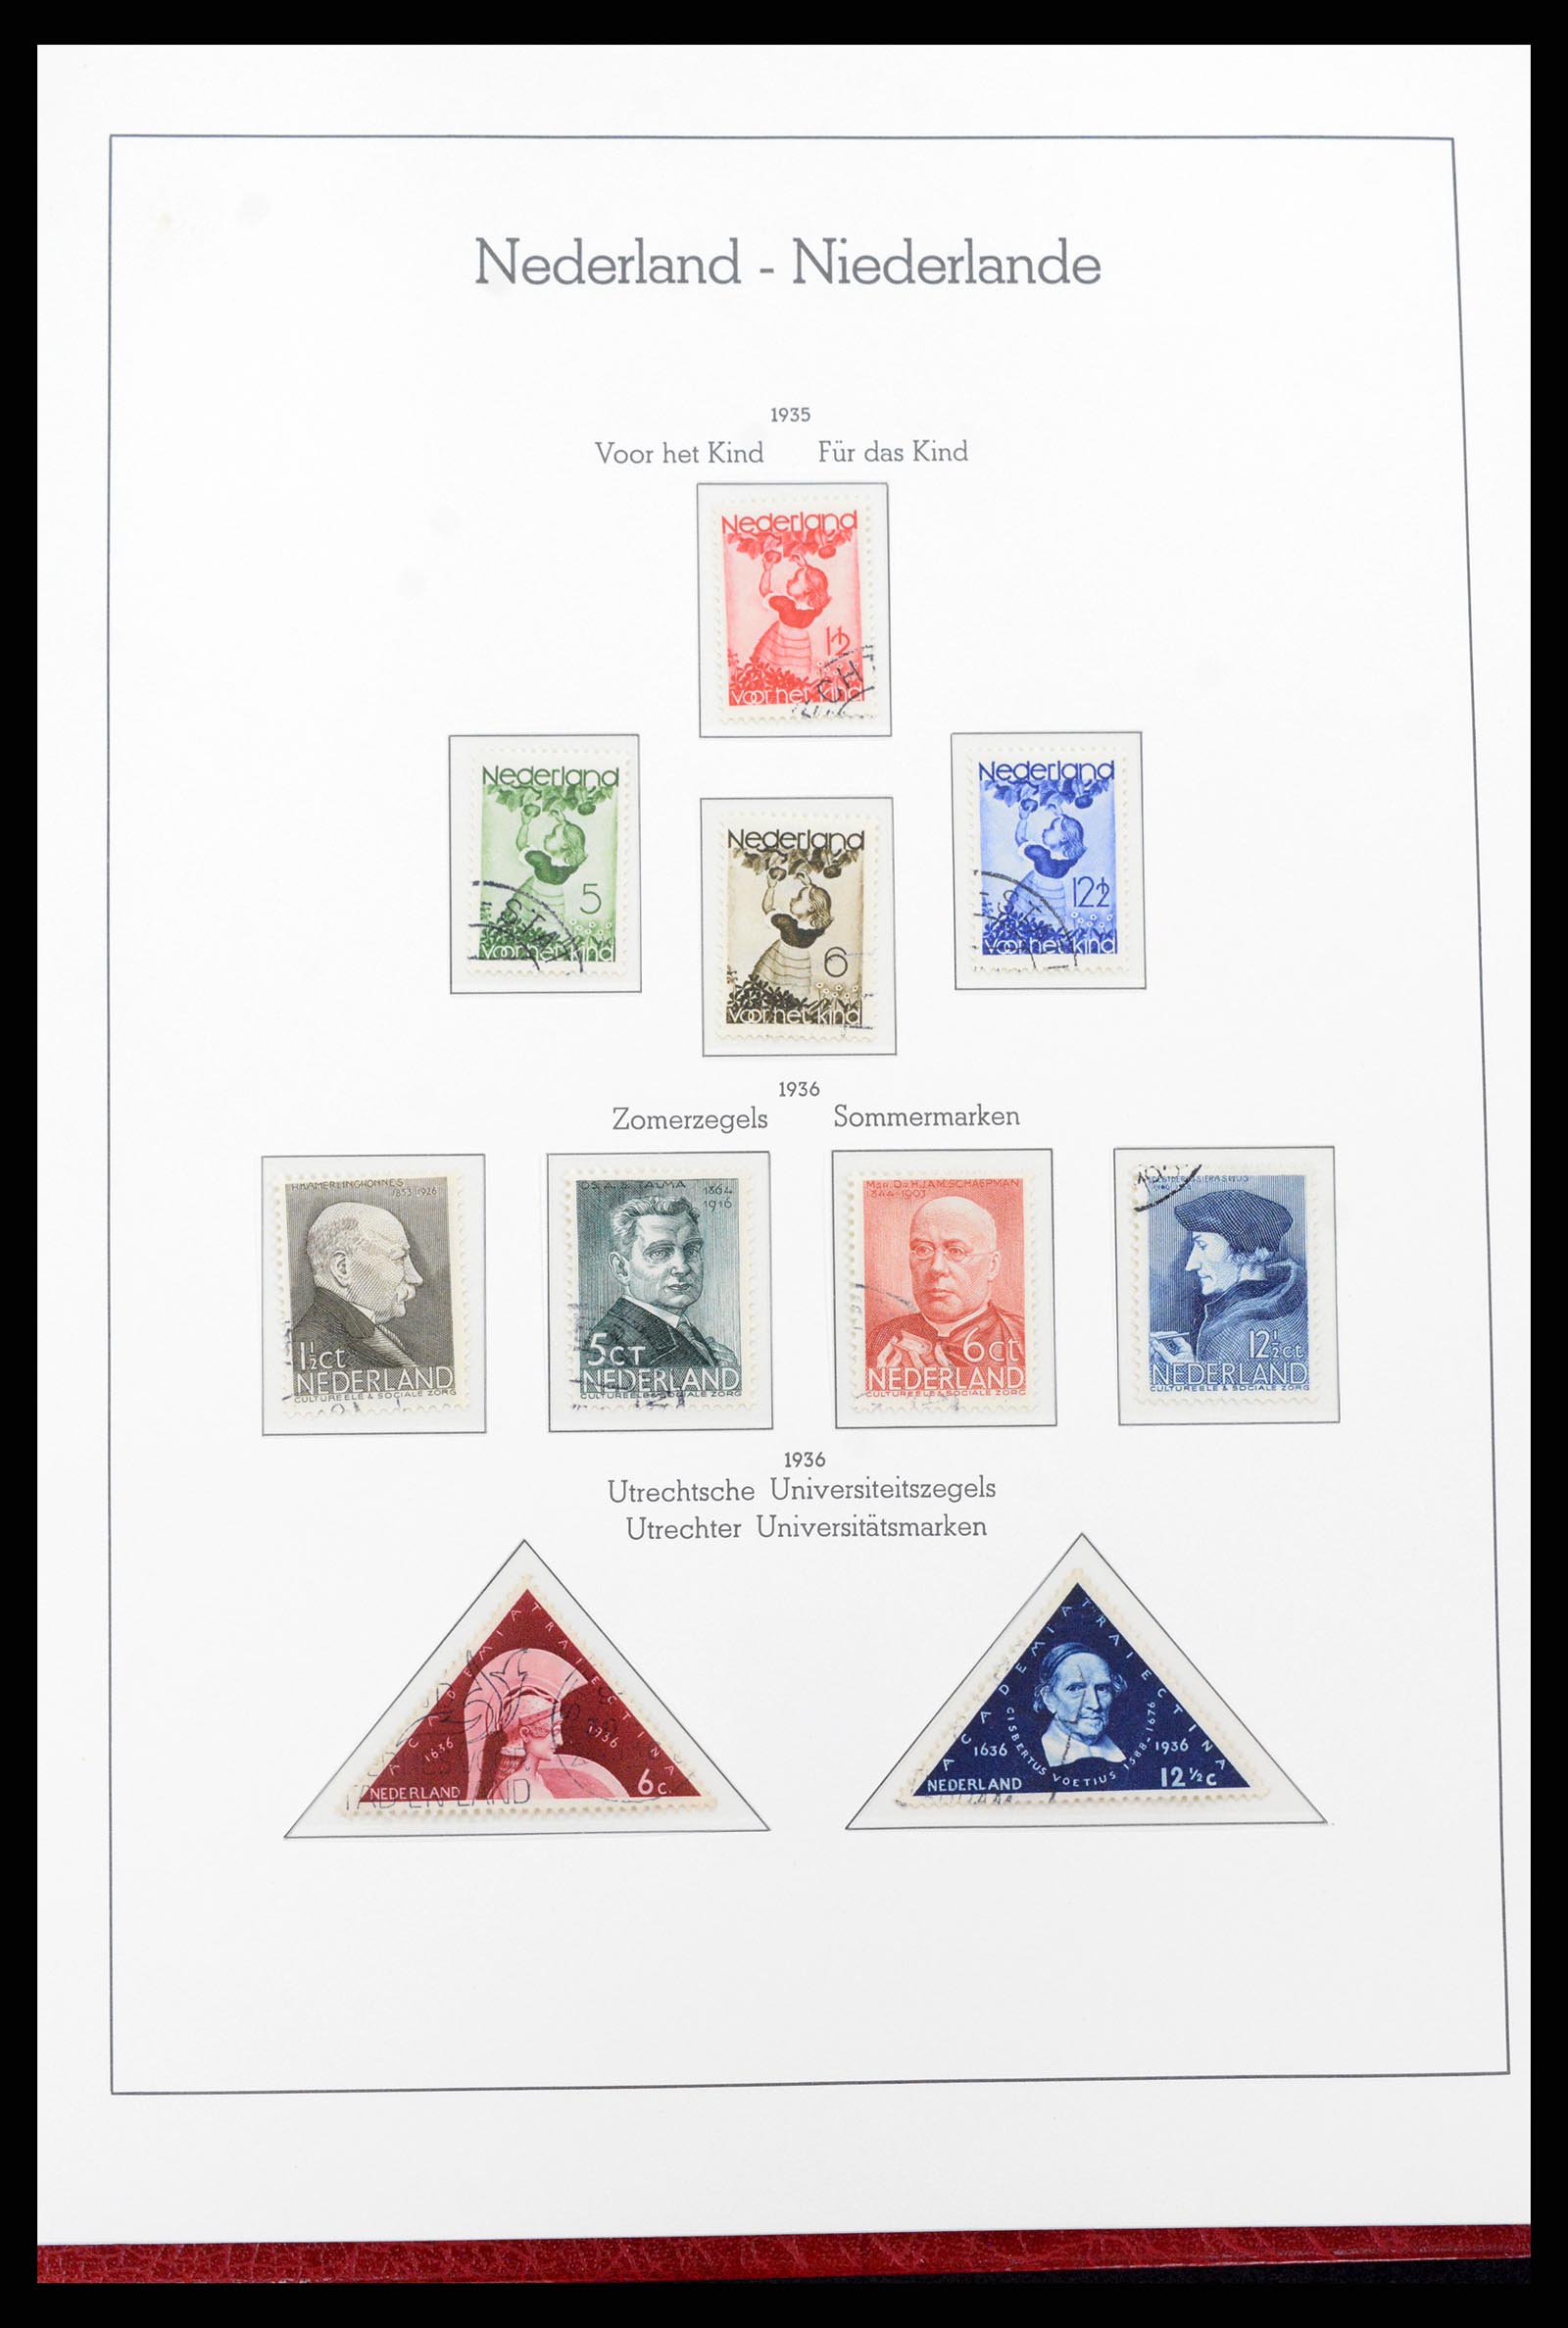 37290 021 - Stamp collection 37290 Netherlands 1852-1945.